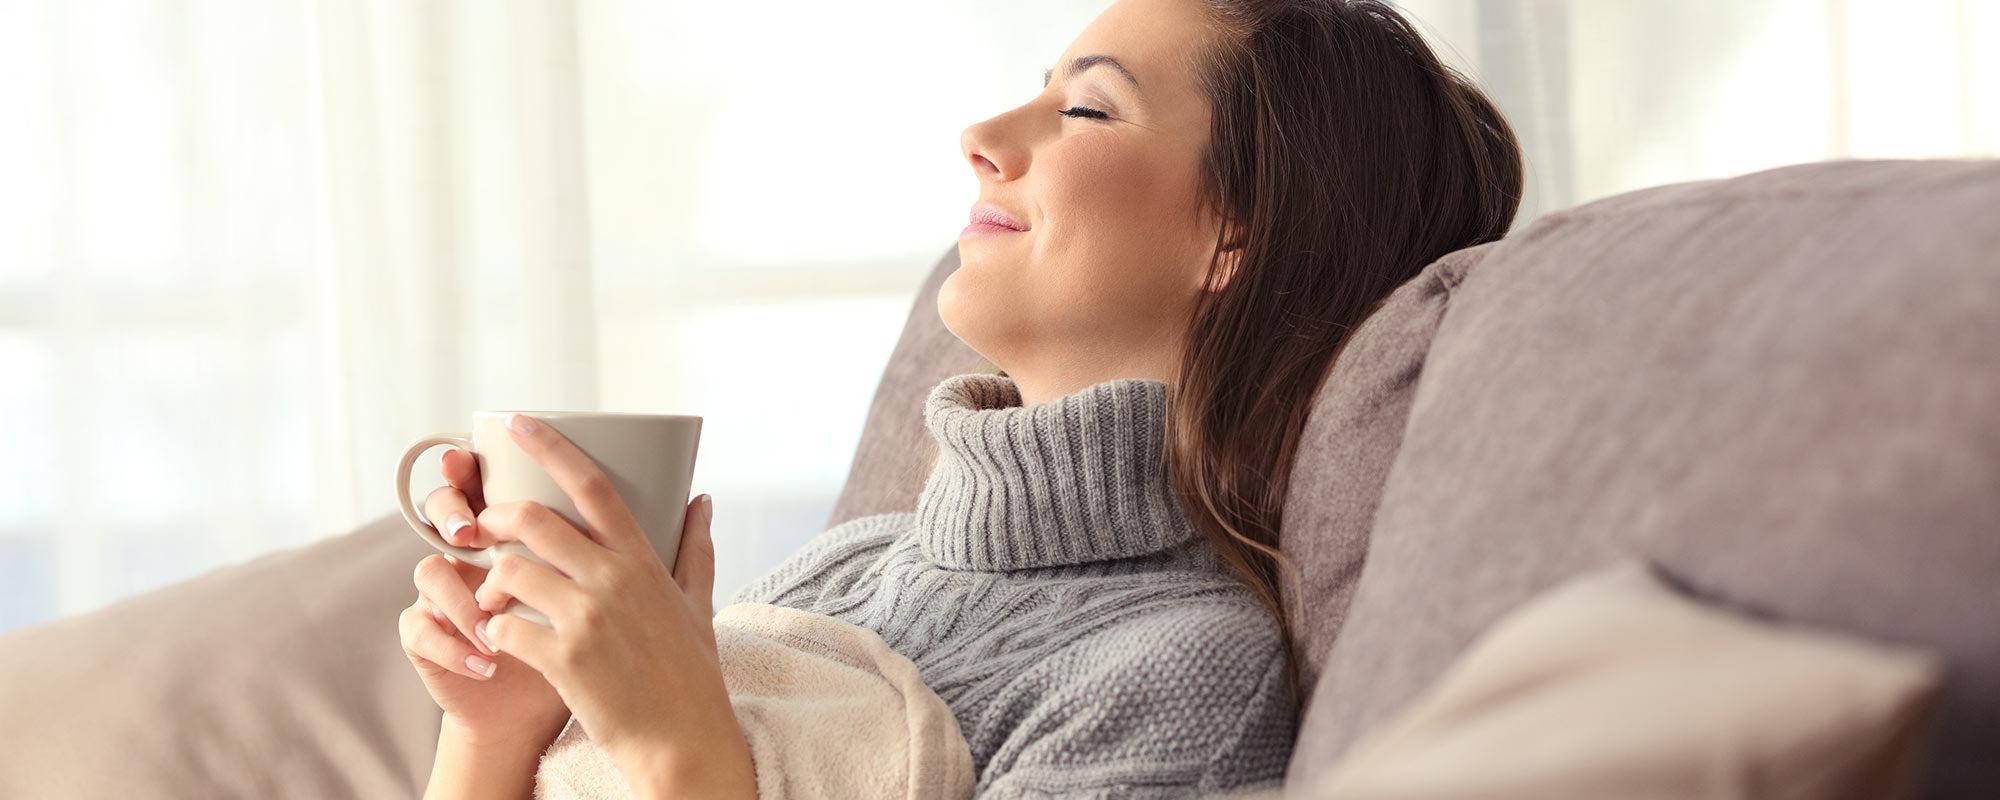 young woman sitting on couch with cup in hand enjoying heating system